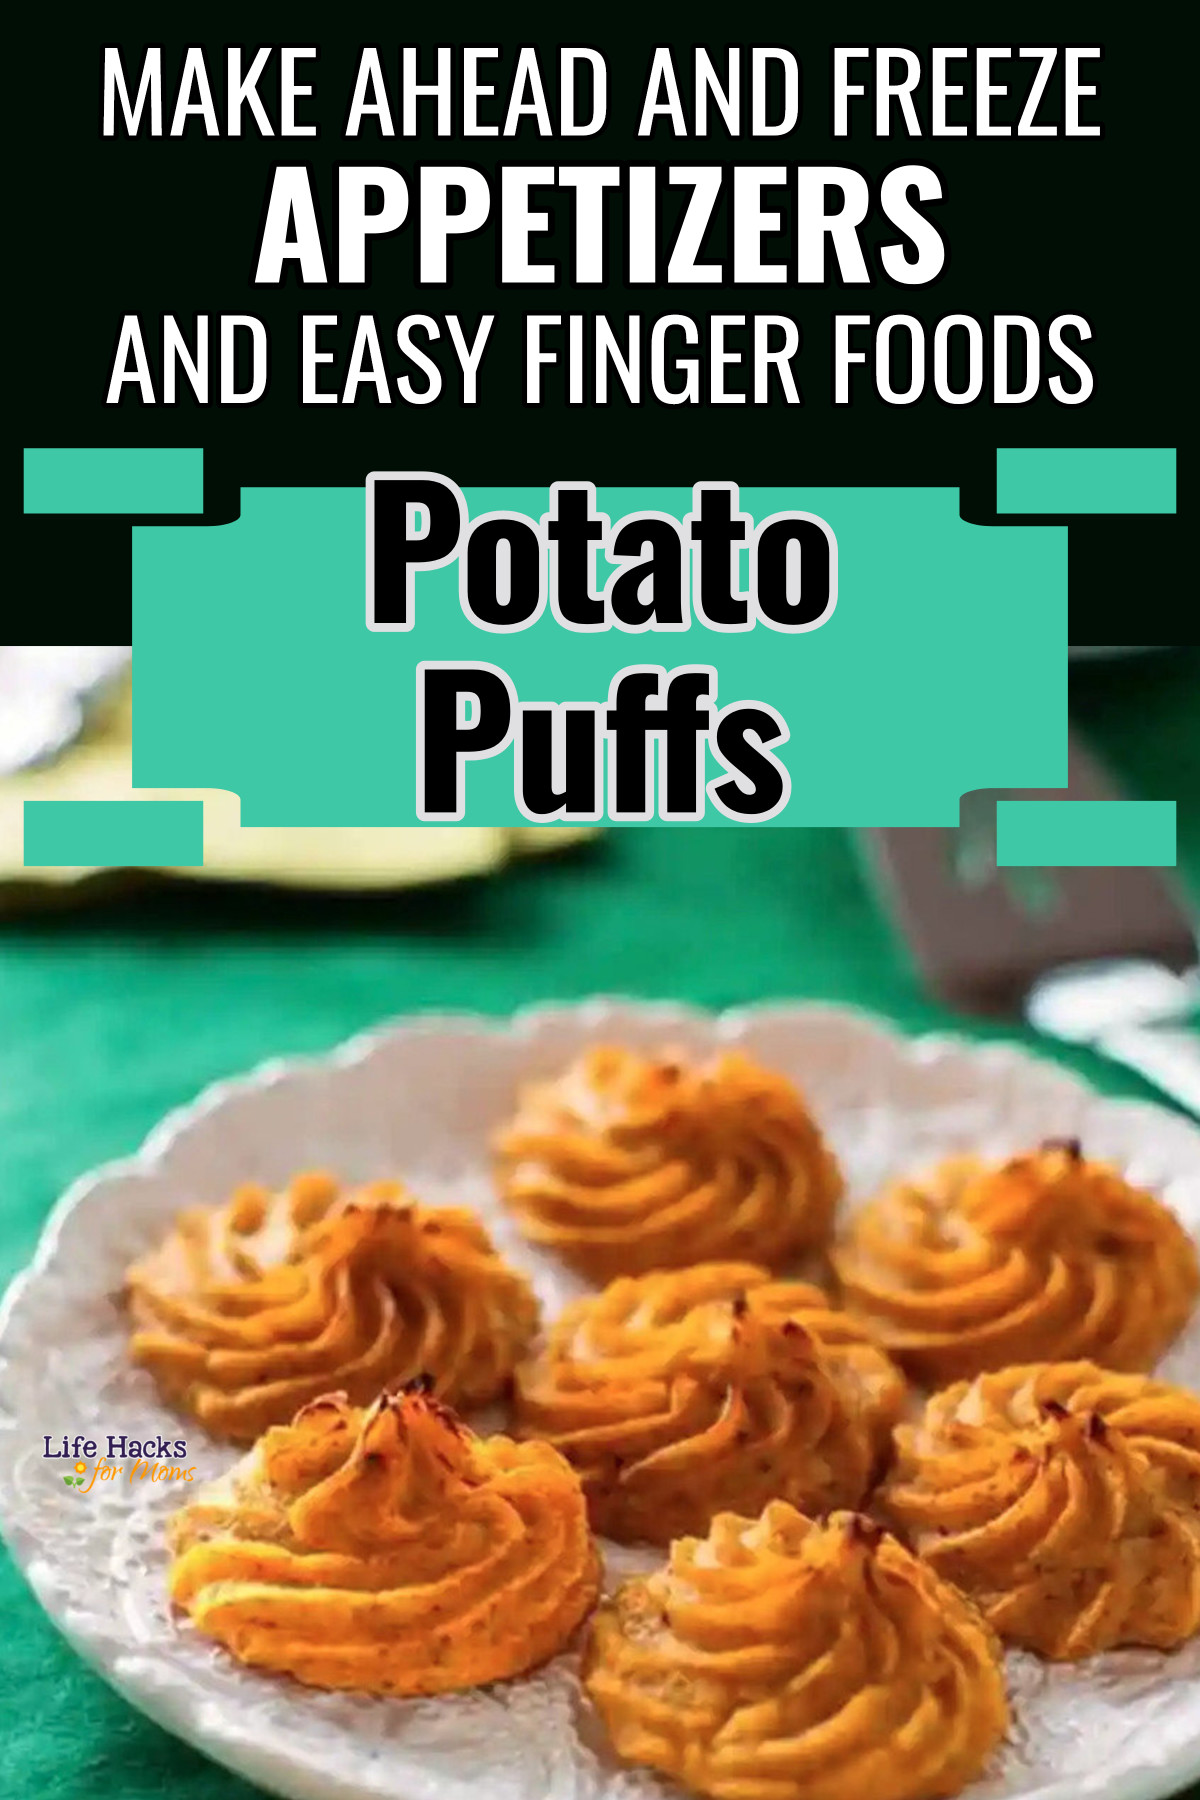 Make Ahead And Freeze Appetizers- Potato Puffs